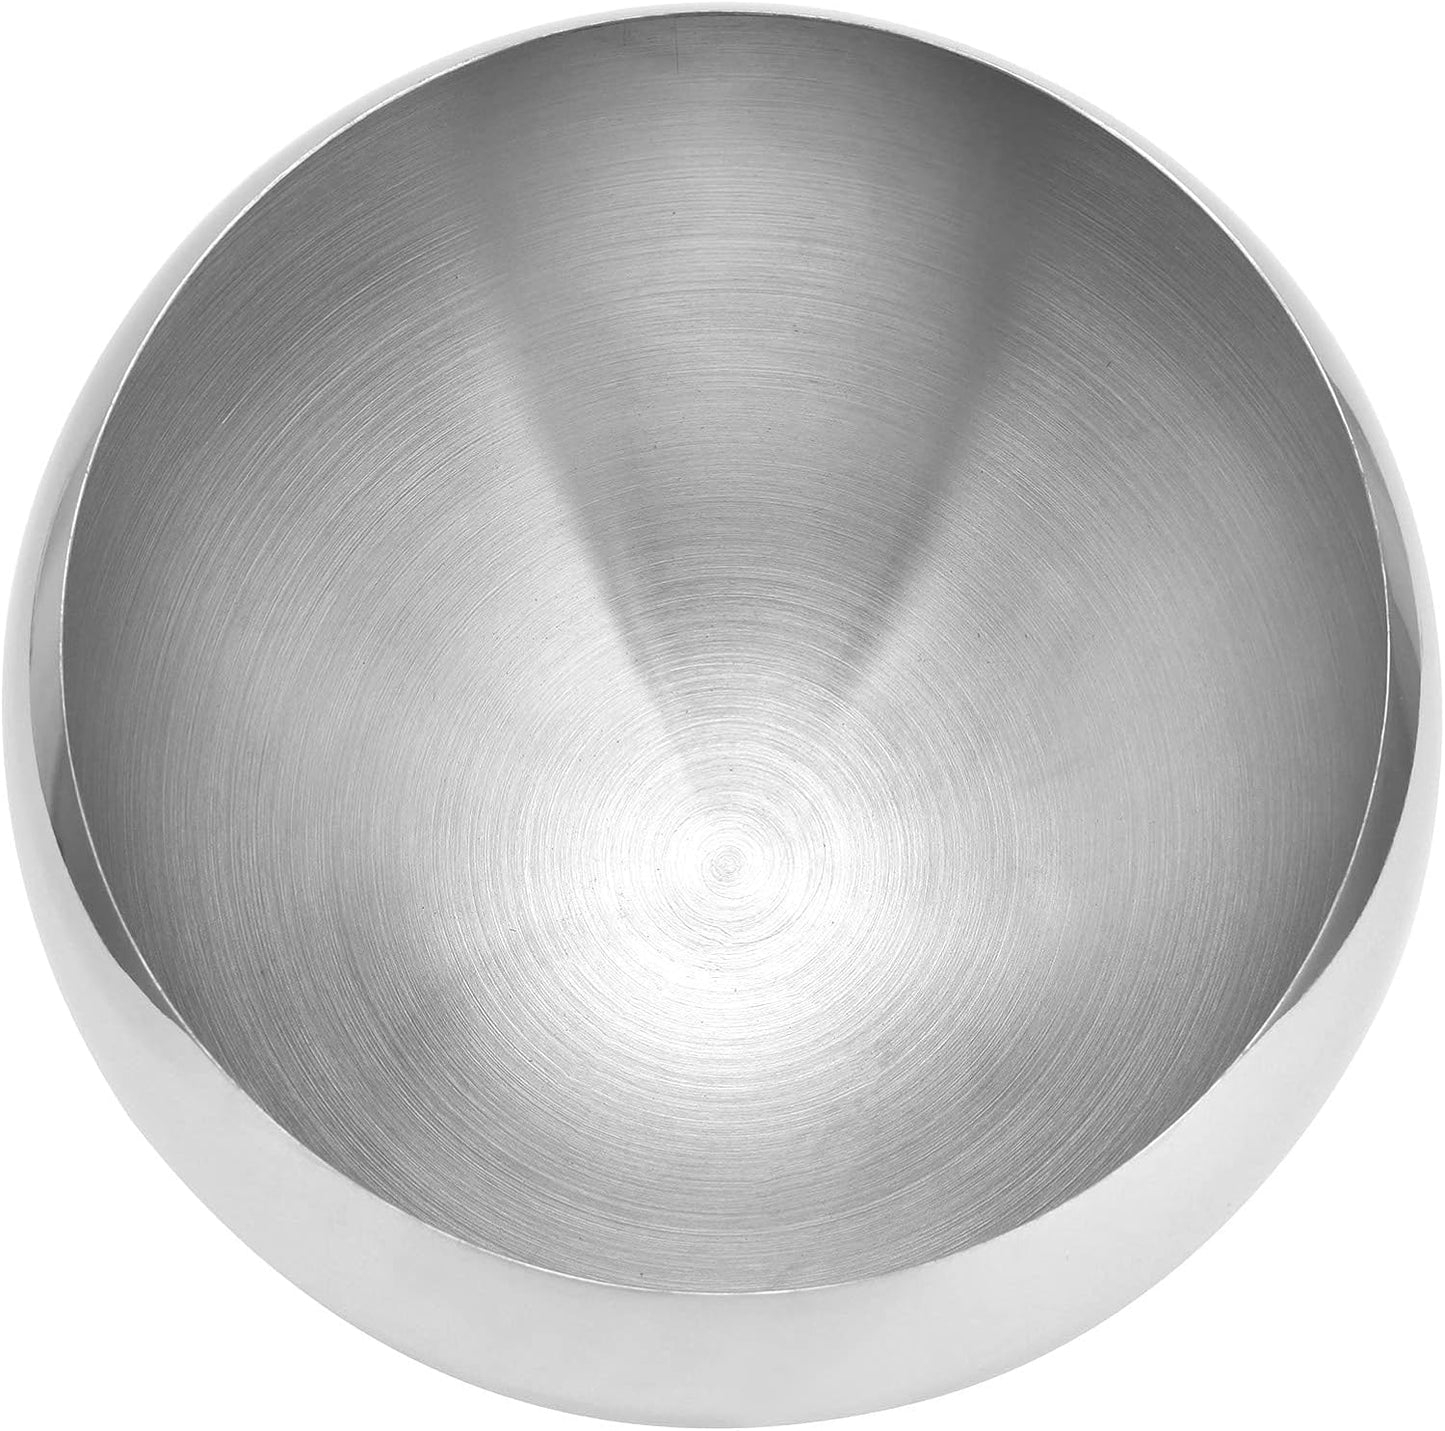 18cm Silver Saucer Bowl For Sauce, Snack, Appetizers